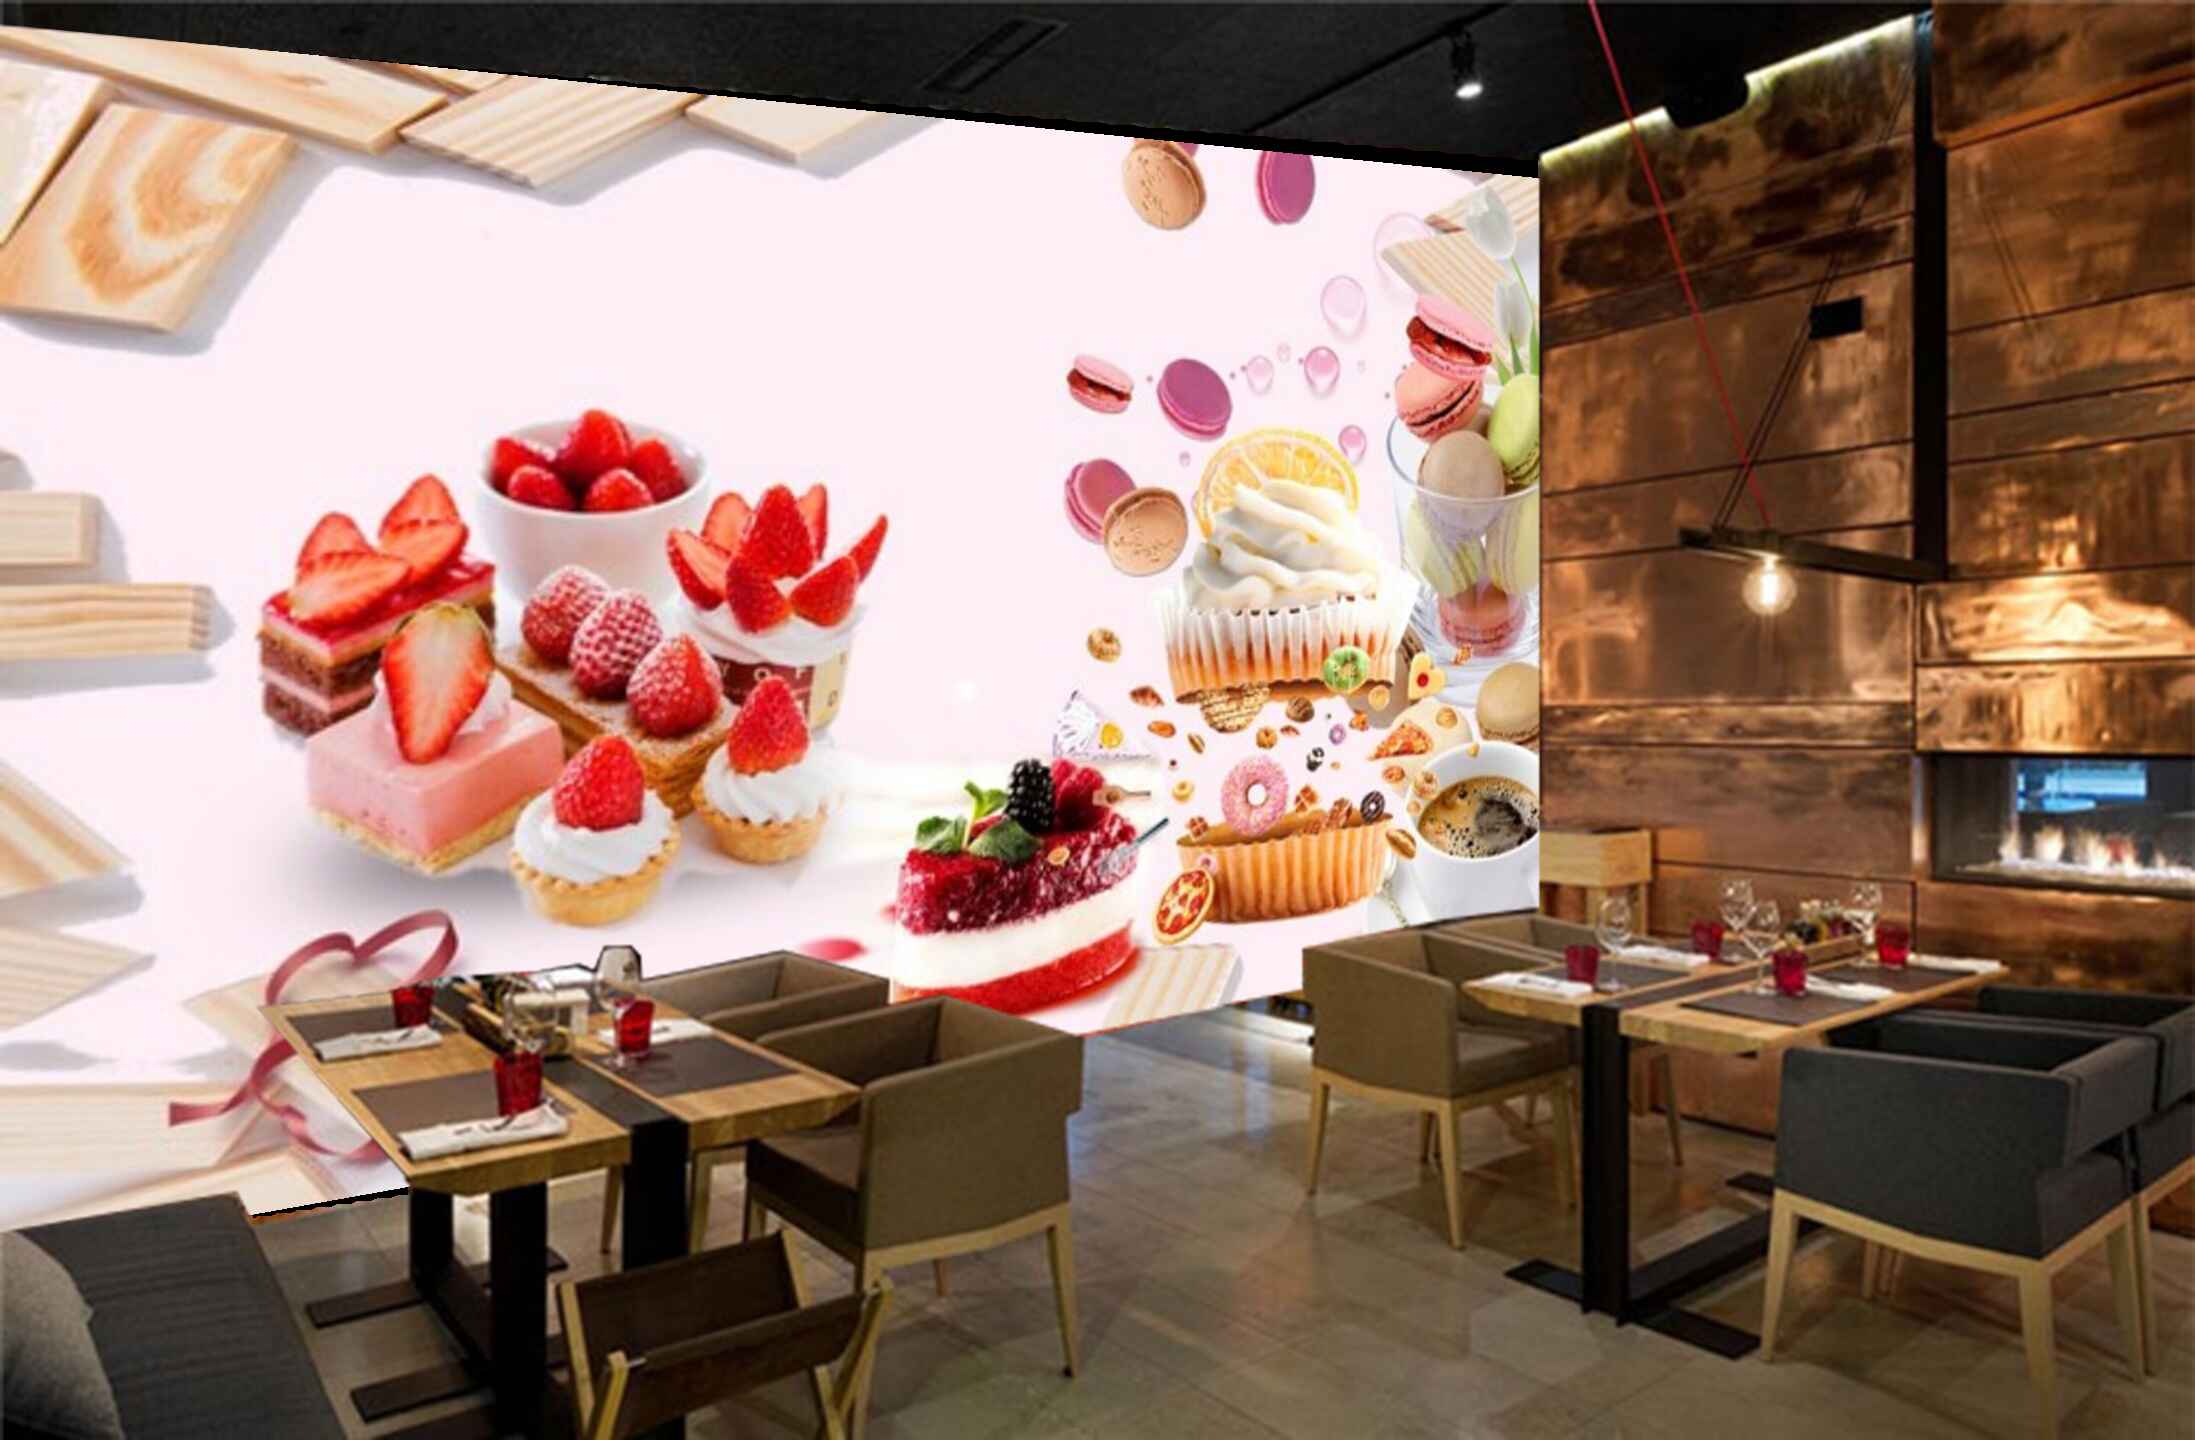 Avikalp MWZ3123 Cup Cakes Fruits Cookies Coffee HD Wallpaper for Cafe Restaurant